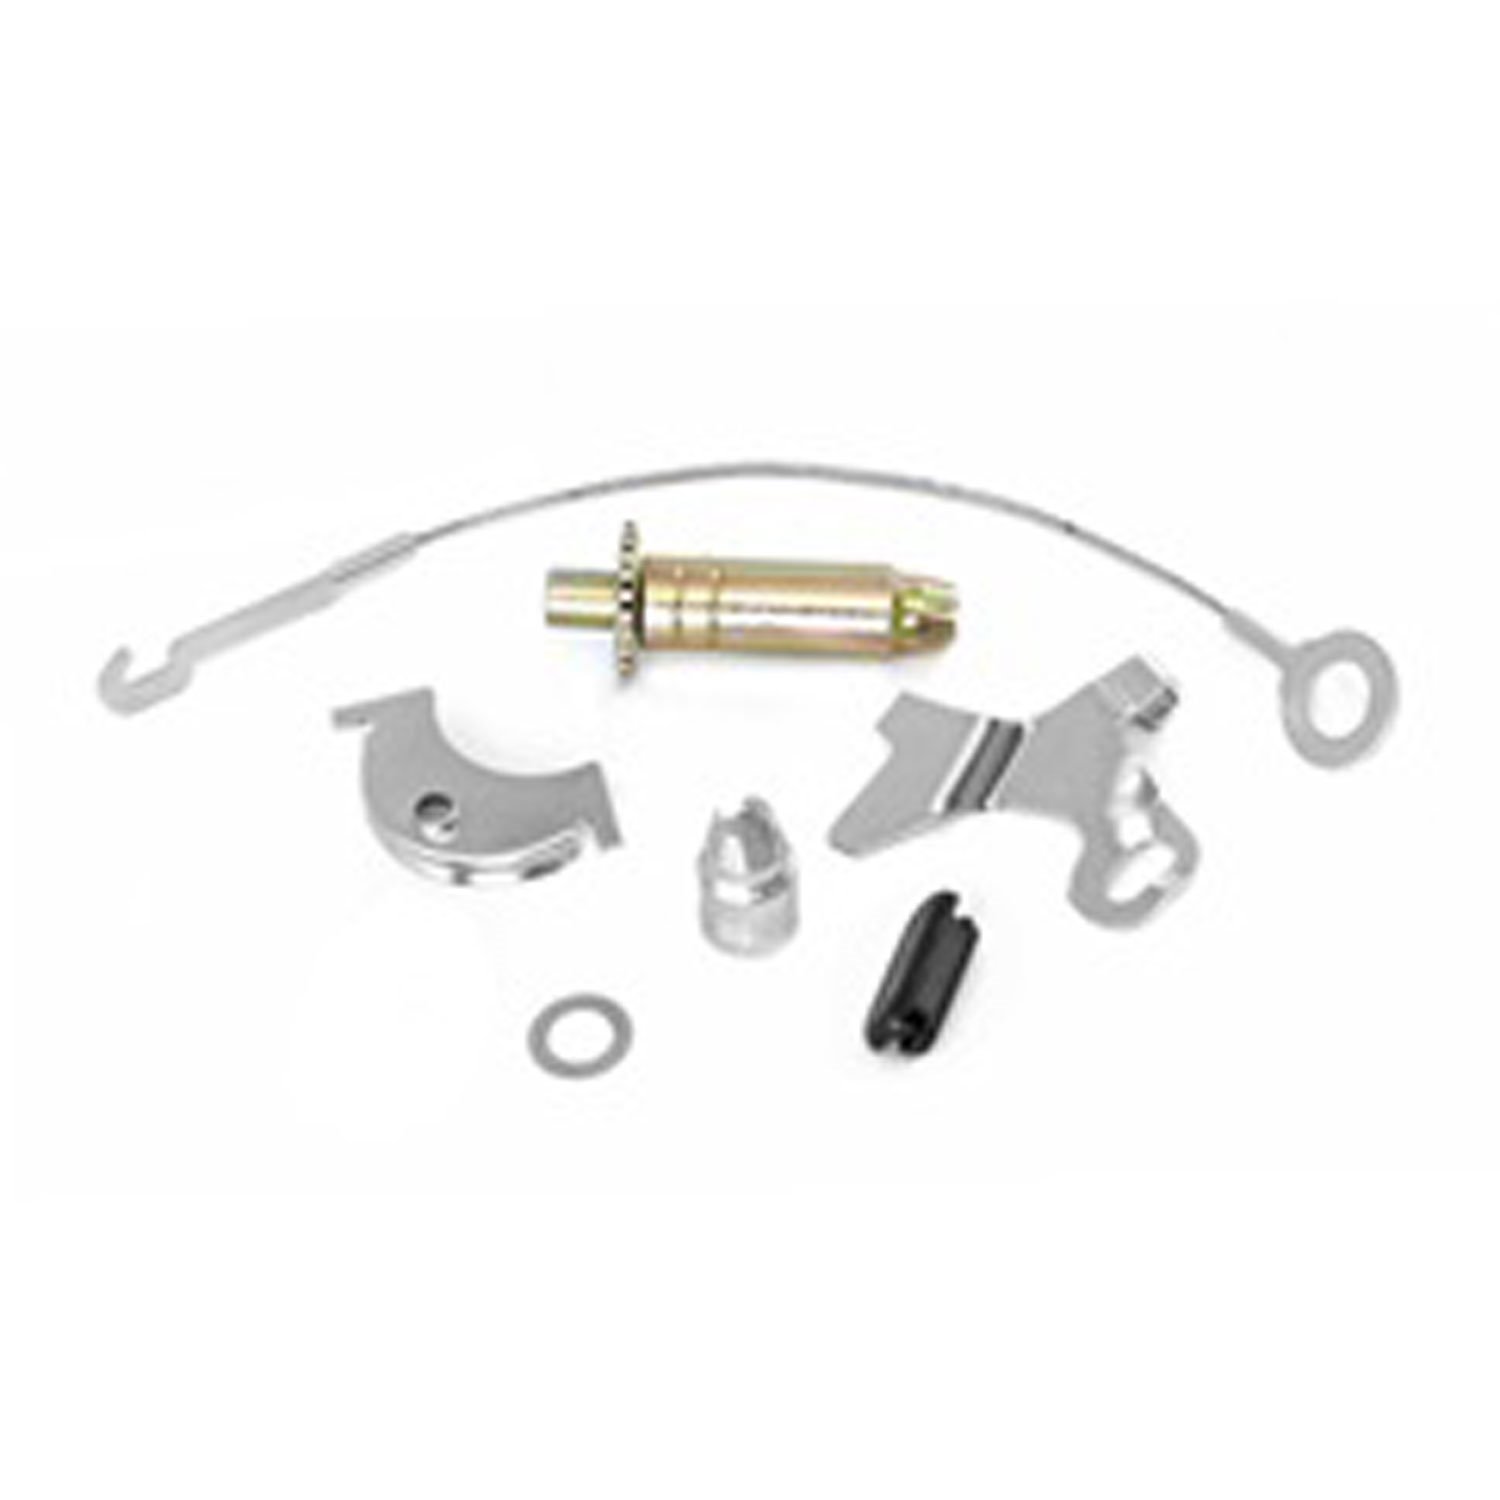 This self-adjusting 10 inch drum brake hardware kit from Omix-ADA fits the right side on the front o